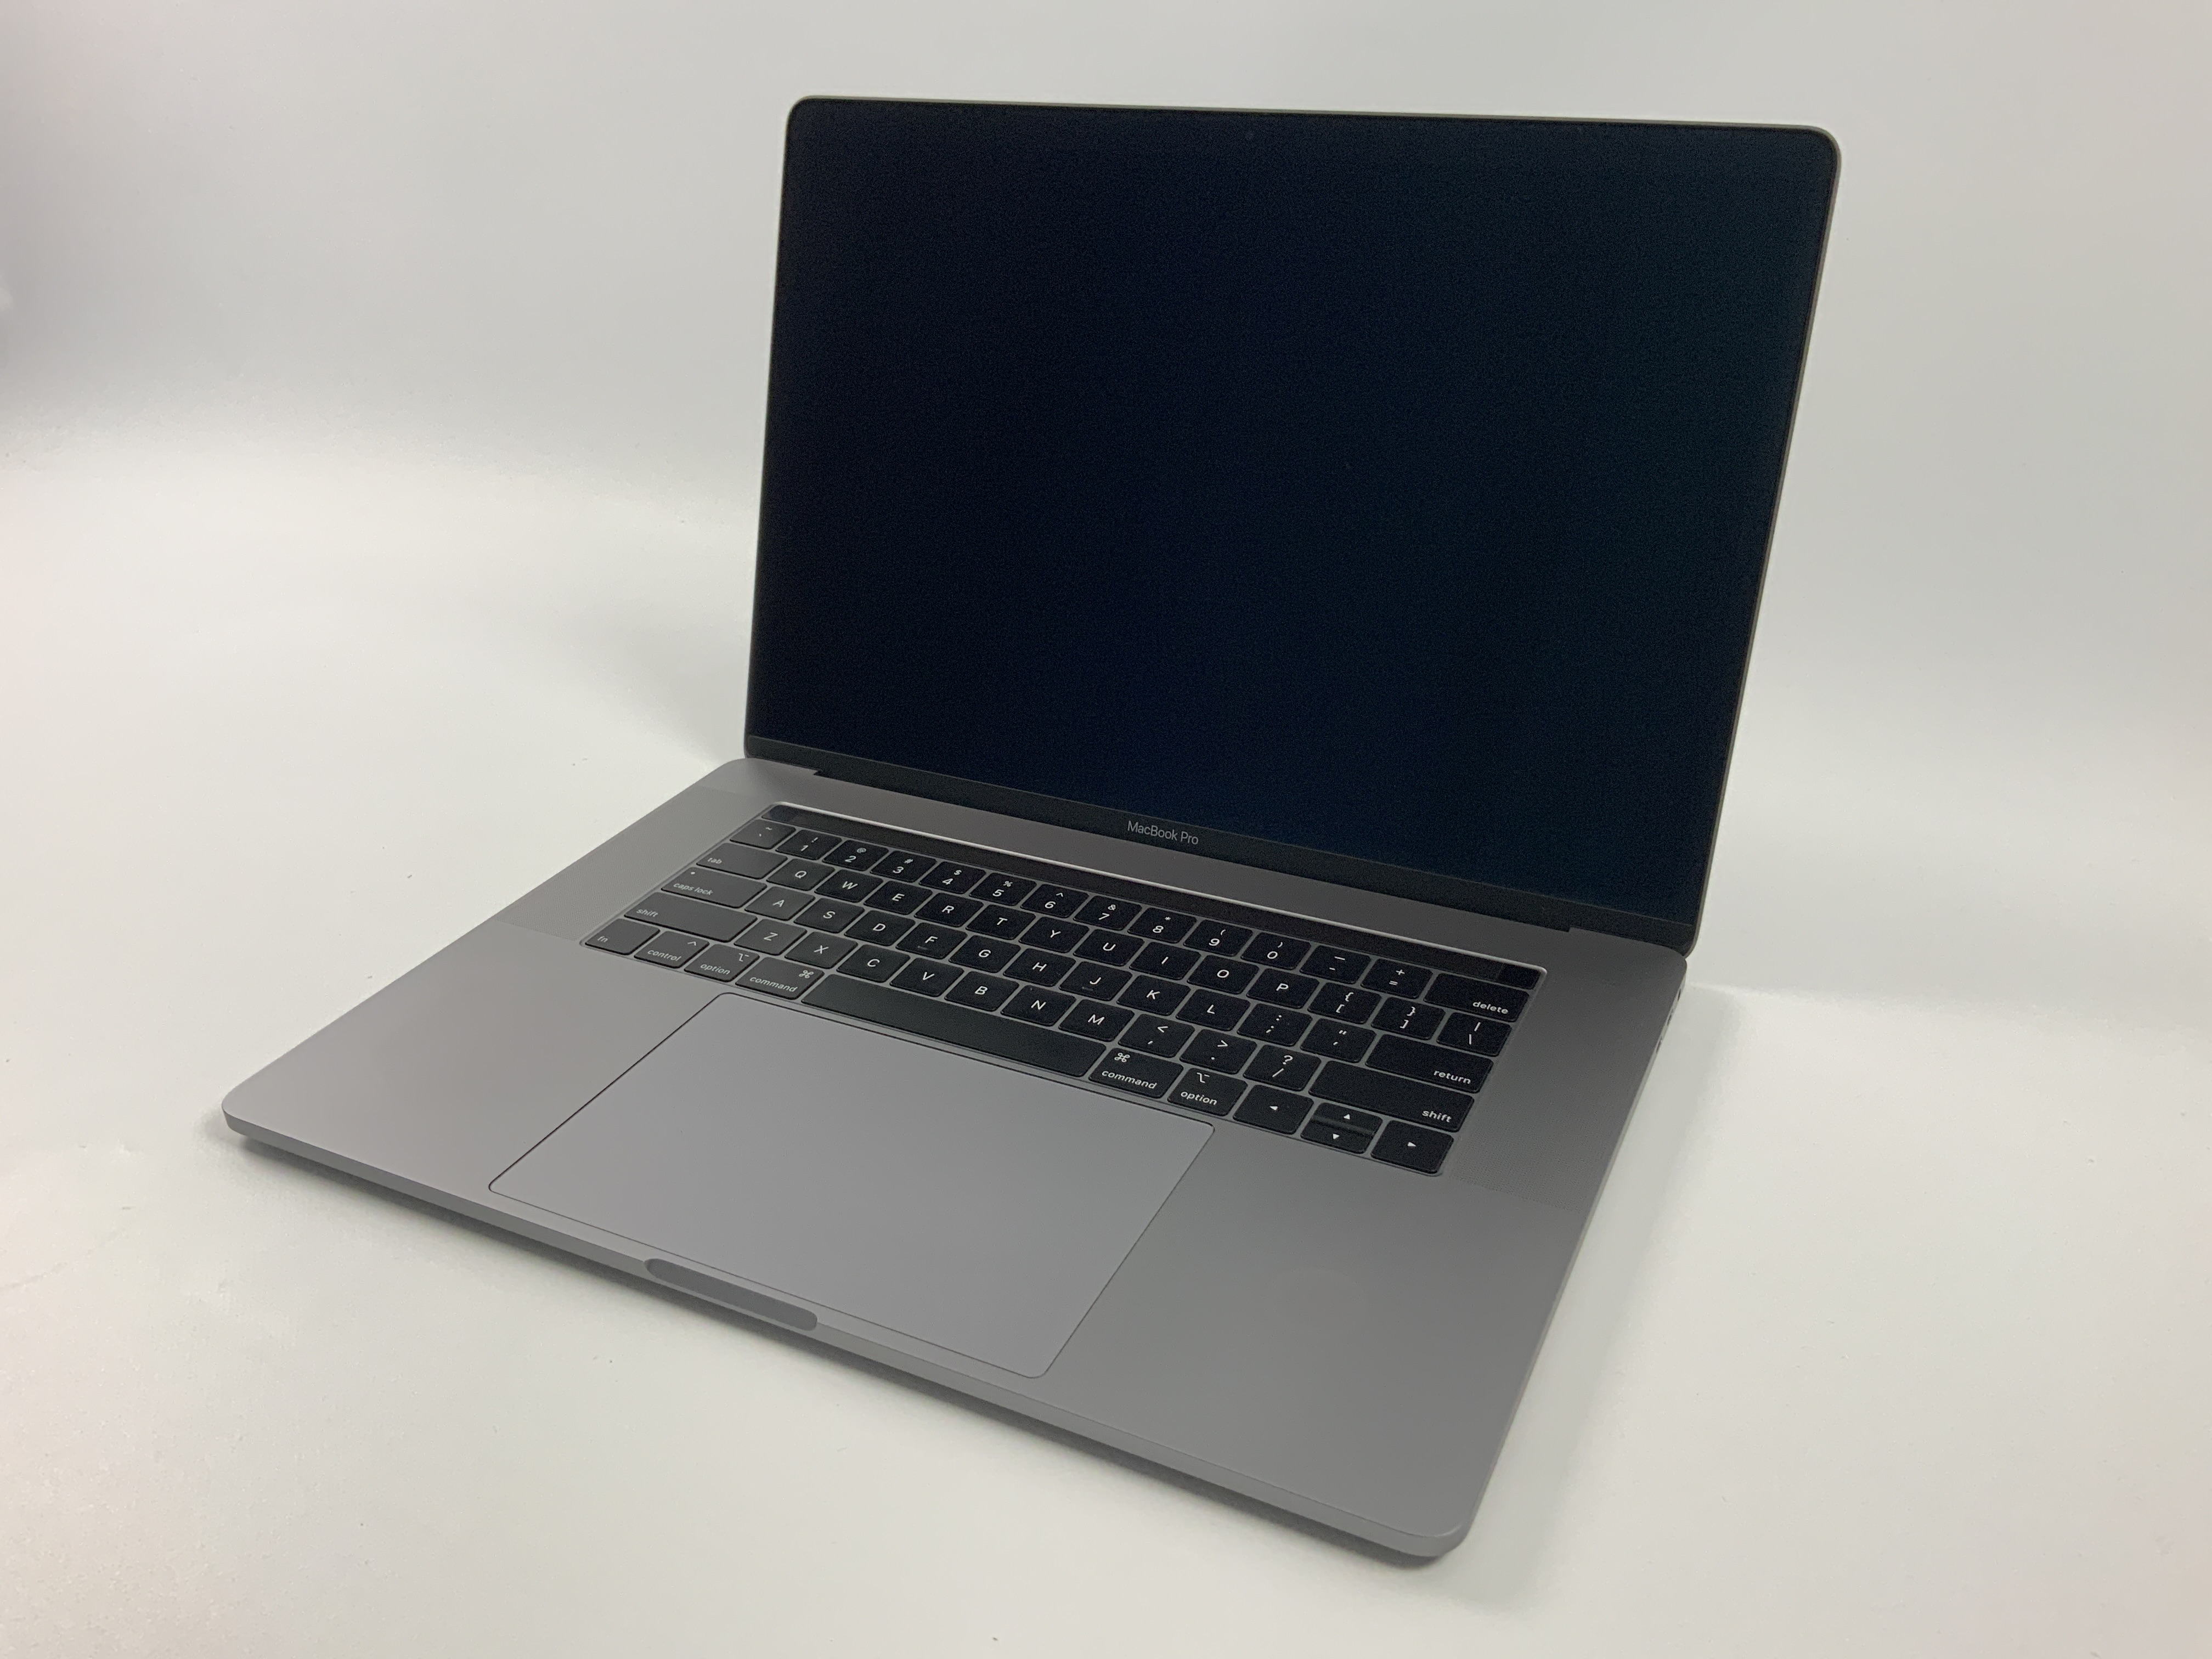 MacBook Pro 15" Touch Bar Mid 2018 (Intel 6-Core i7 2.2 GHz 16 GB RAM 256 GB SSD), Space Gray, Intel 6-Core i7 2.2 GHz, 16 GB RAM, 256 GB SSD, Afbeelding 1